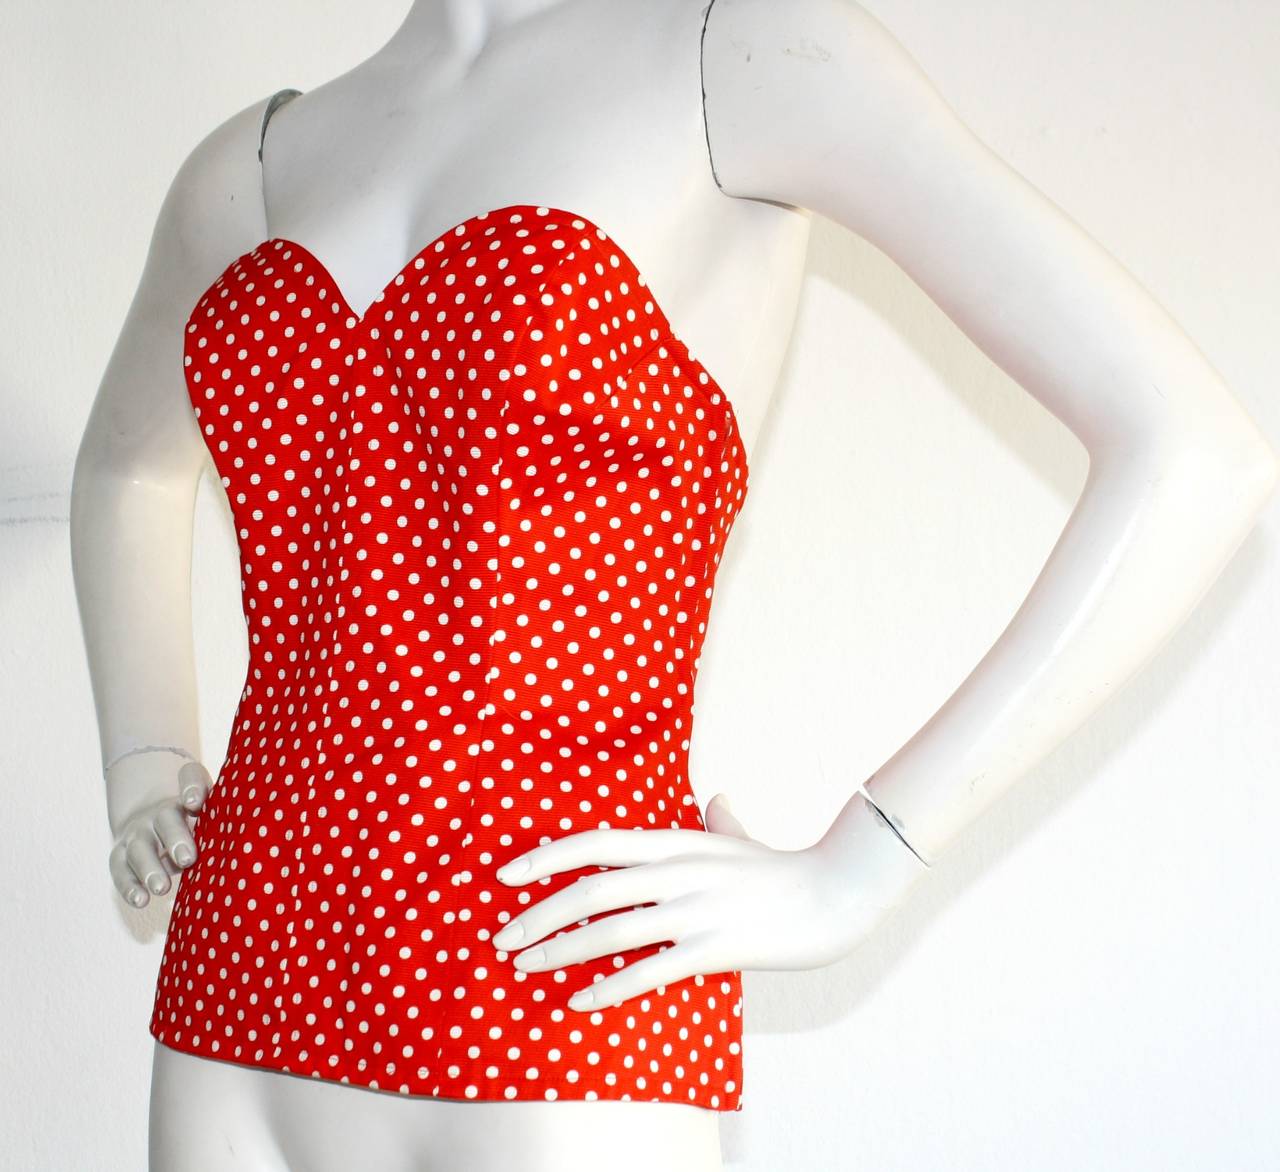 Sexy vintage YSL Rive Gauche red & white polka dot bustier/corset top.built in waistband support. Fully lined, and easily transitions from day to night. In great  condition. Never worn. Marked size EU 42

Measurements:
36 inch bust
28 inch waist